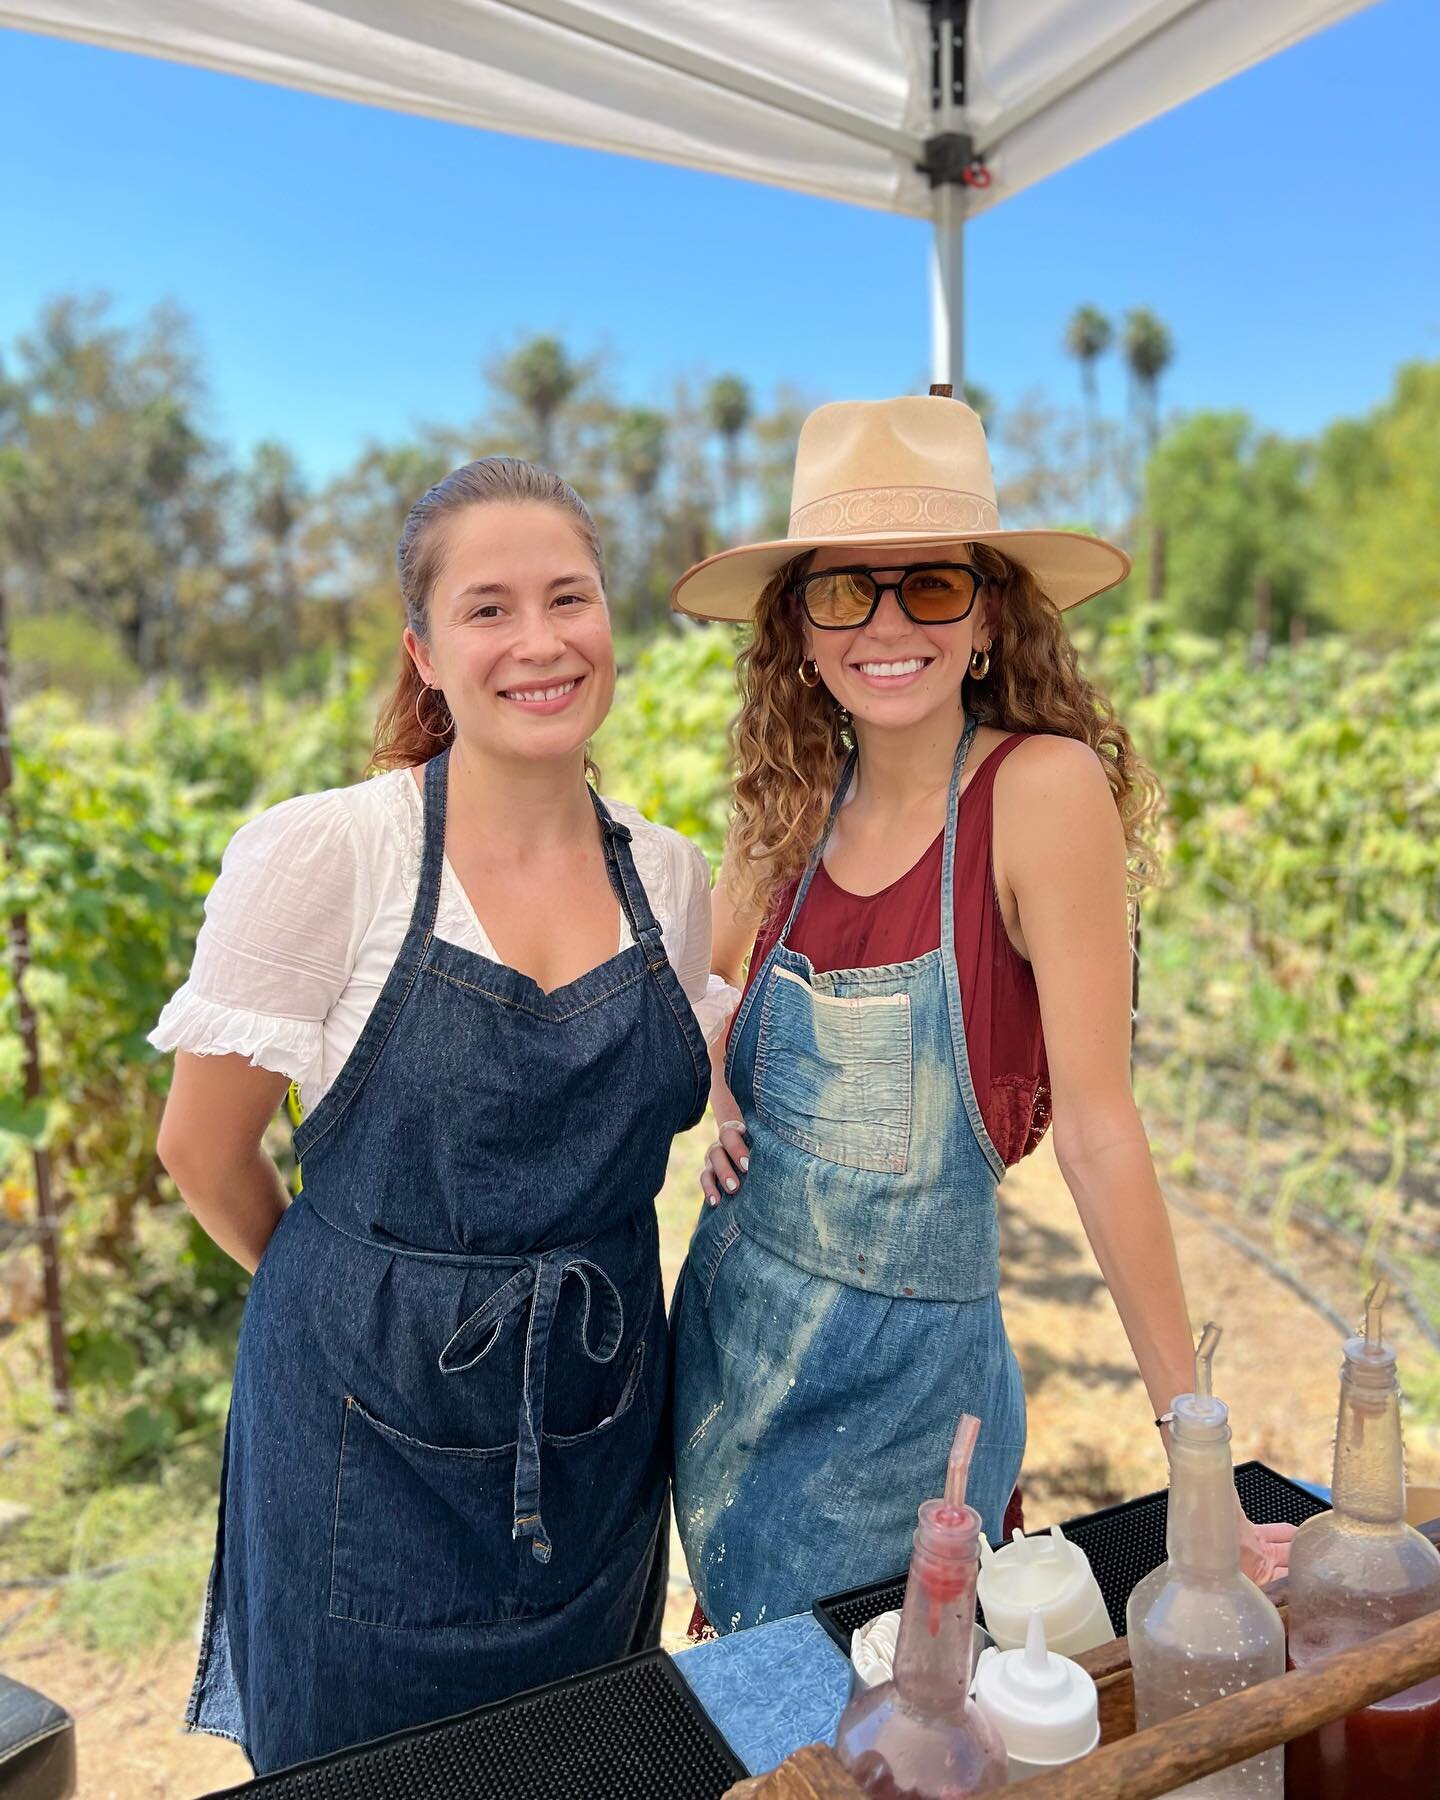 Apricot Lane Farms Update &ndash; Well this really was the biggest little farm we had ever seen. And it really was everything we imagined, including the owners and folks who work there 😍
You guys, do yourself a favor and visit if you can!!!

So thro